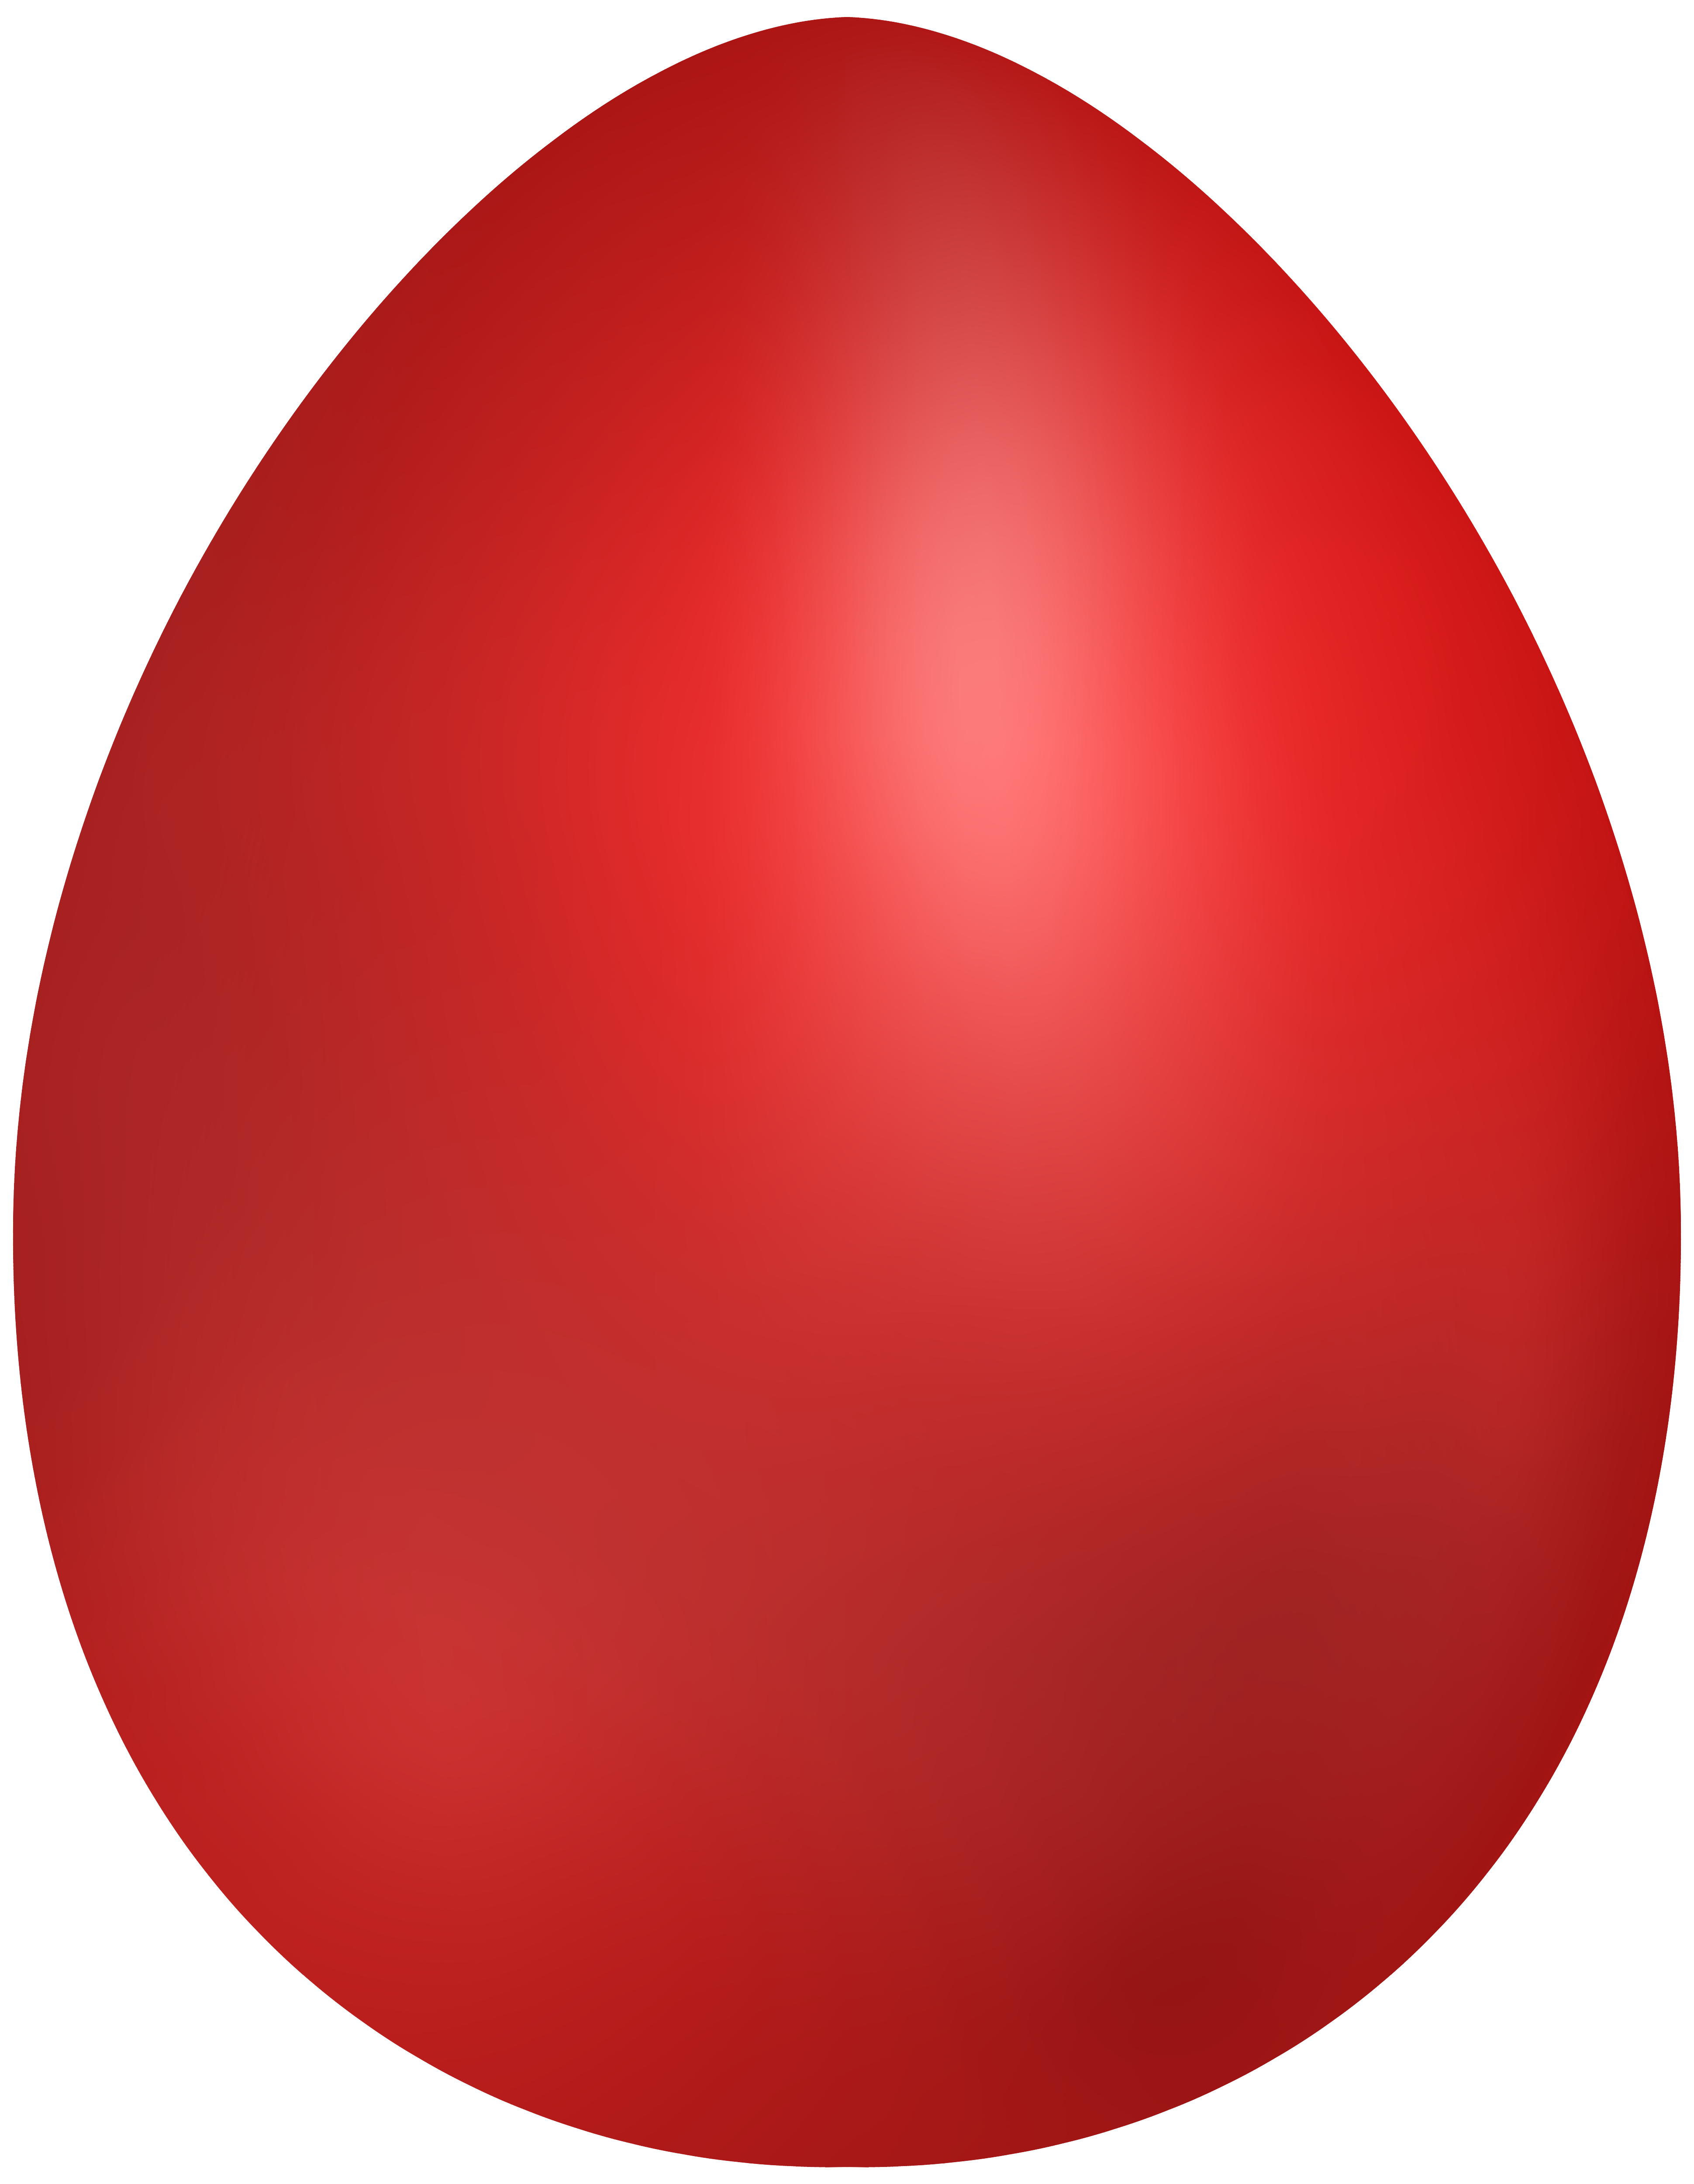 Pasqua easter egg png. Eggs clipart red